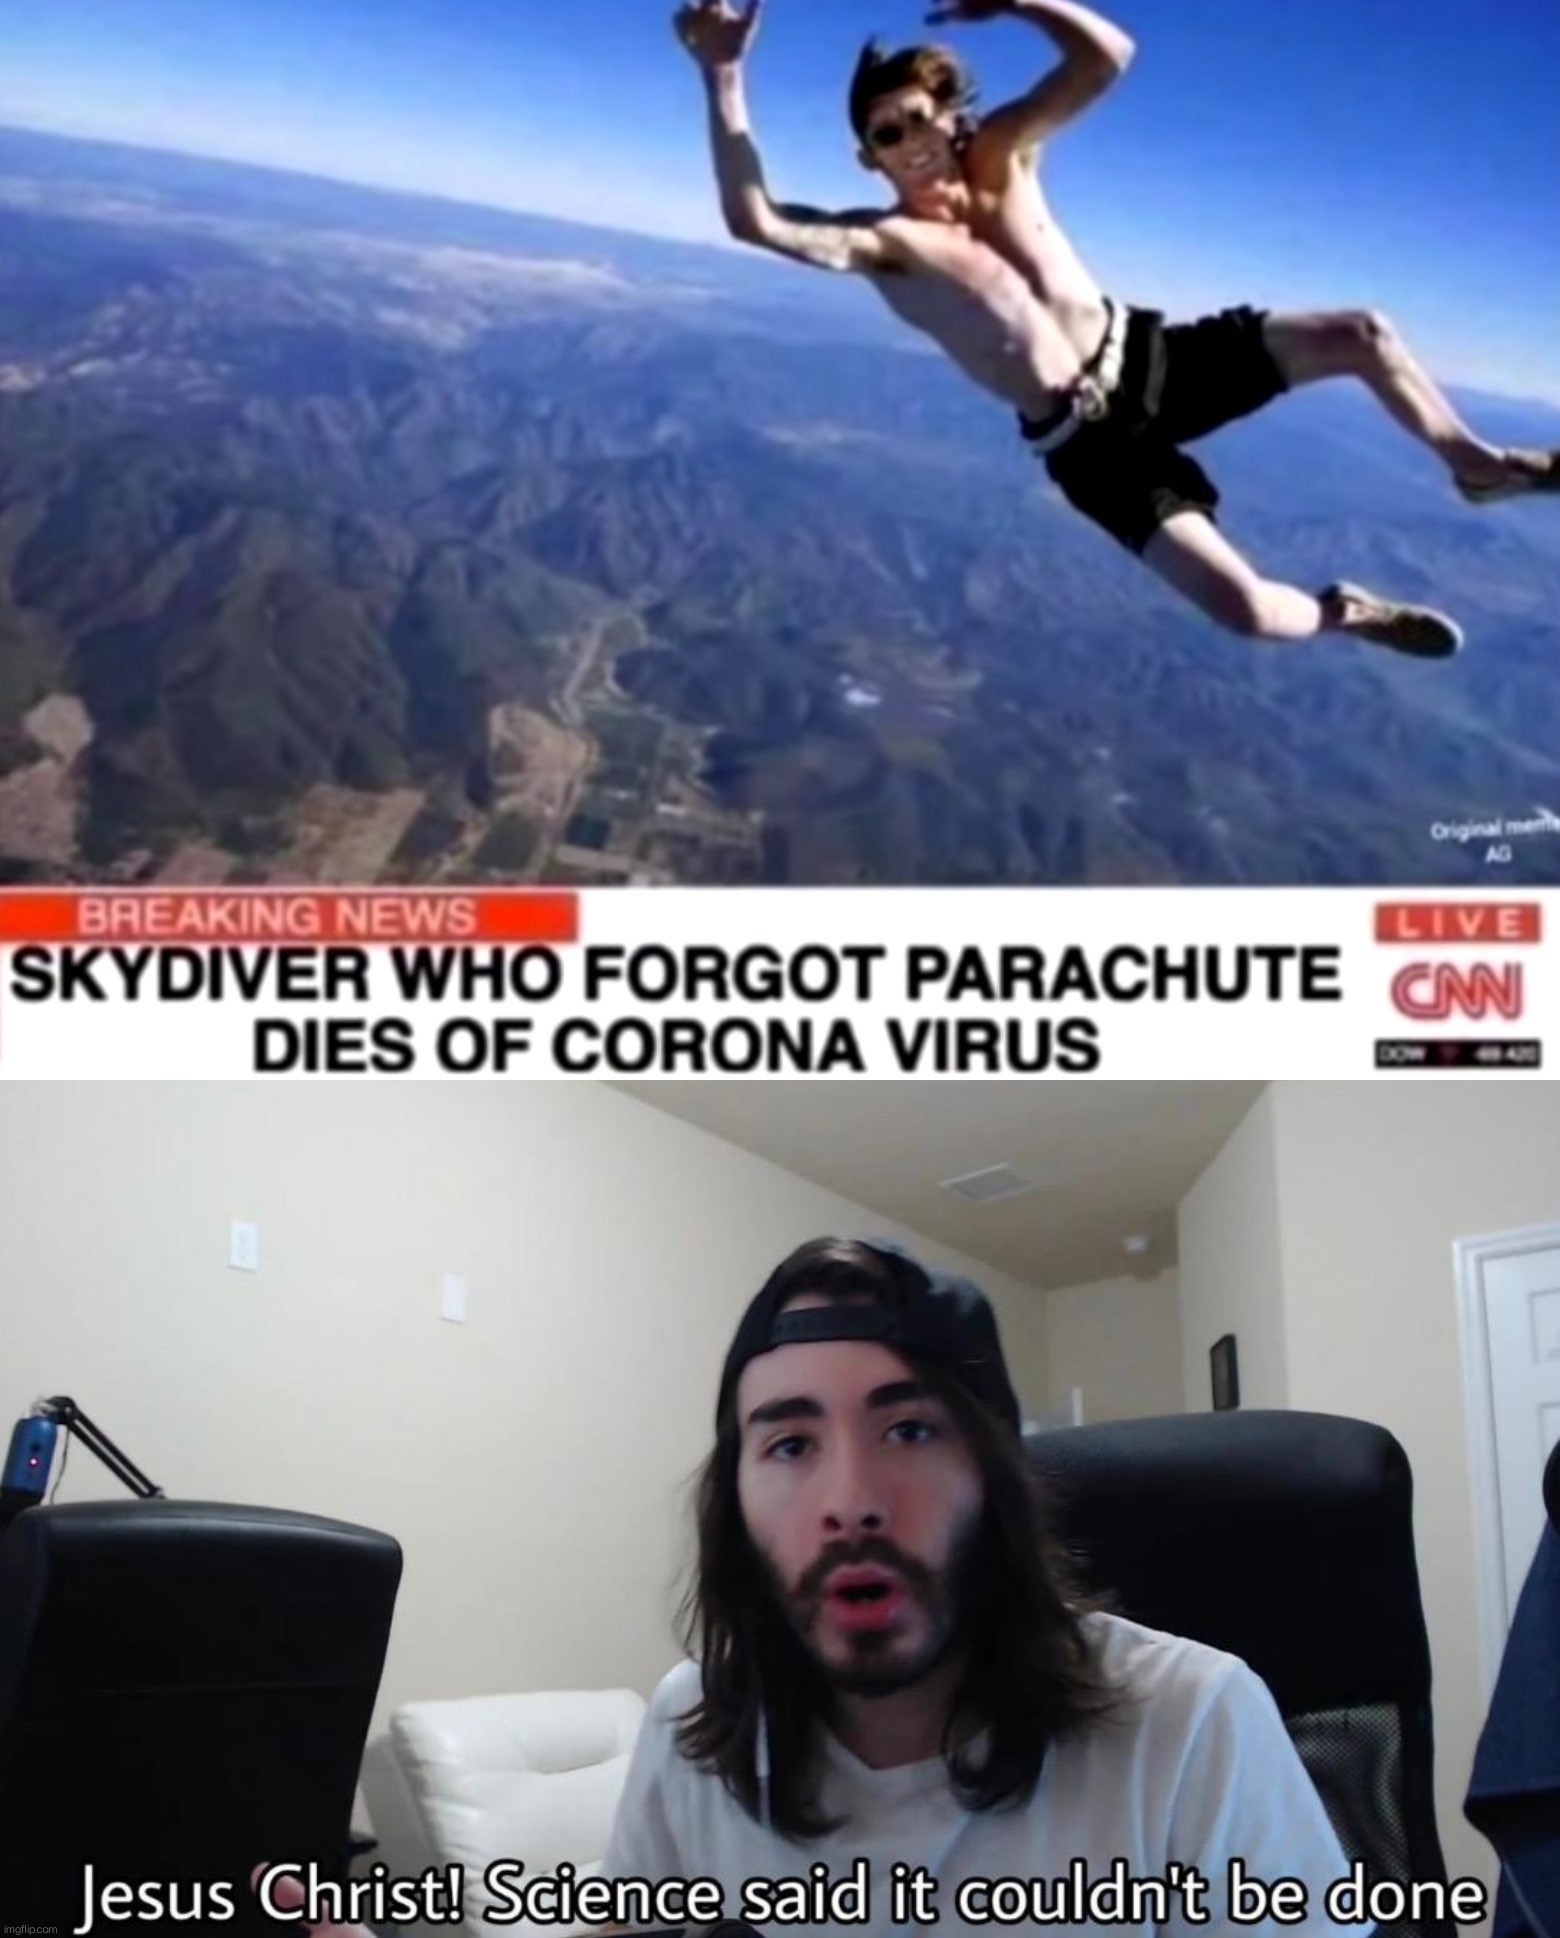 Seriously but how?? | image tagged in jesus christ science said it couldn't be done,cnn fake news,parachute,memes,funny,coronavirus meme | made w/ Imgflip meme maker